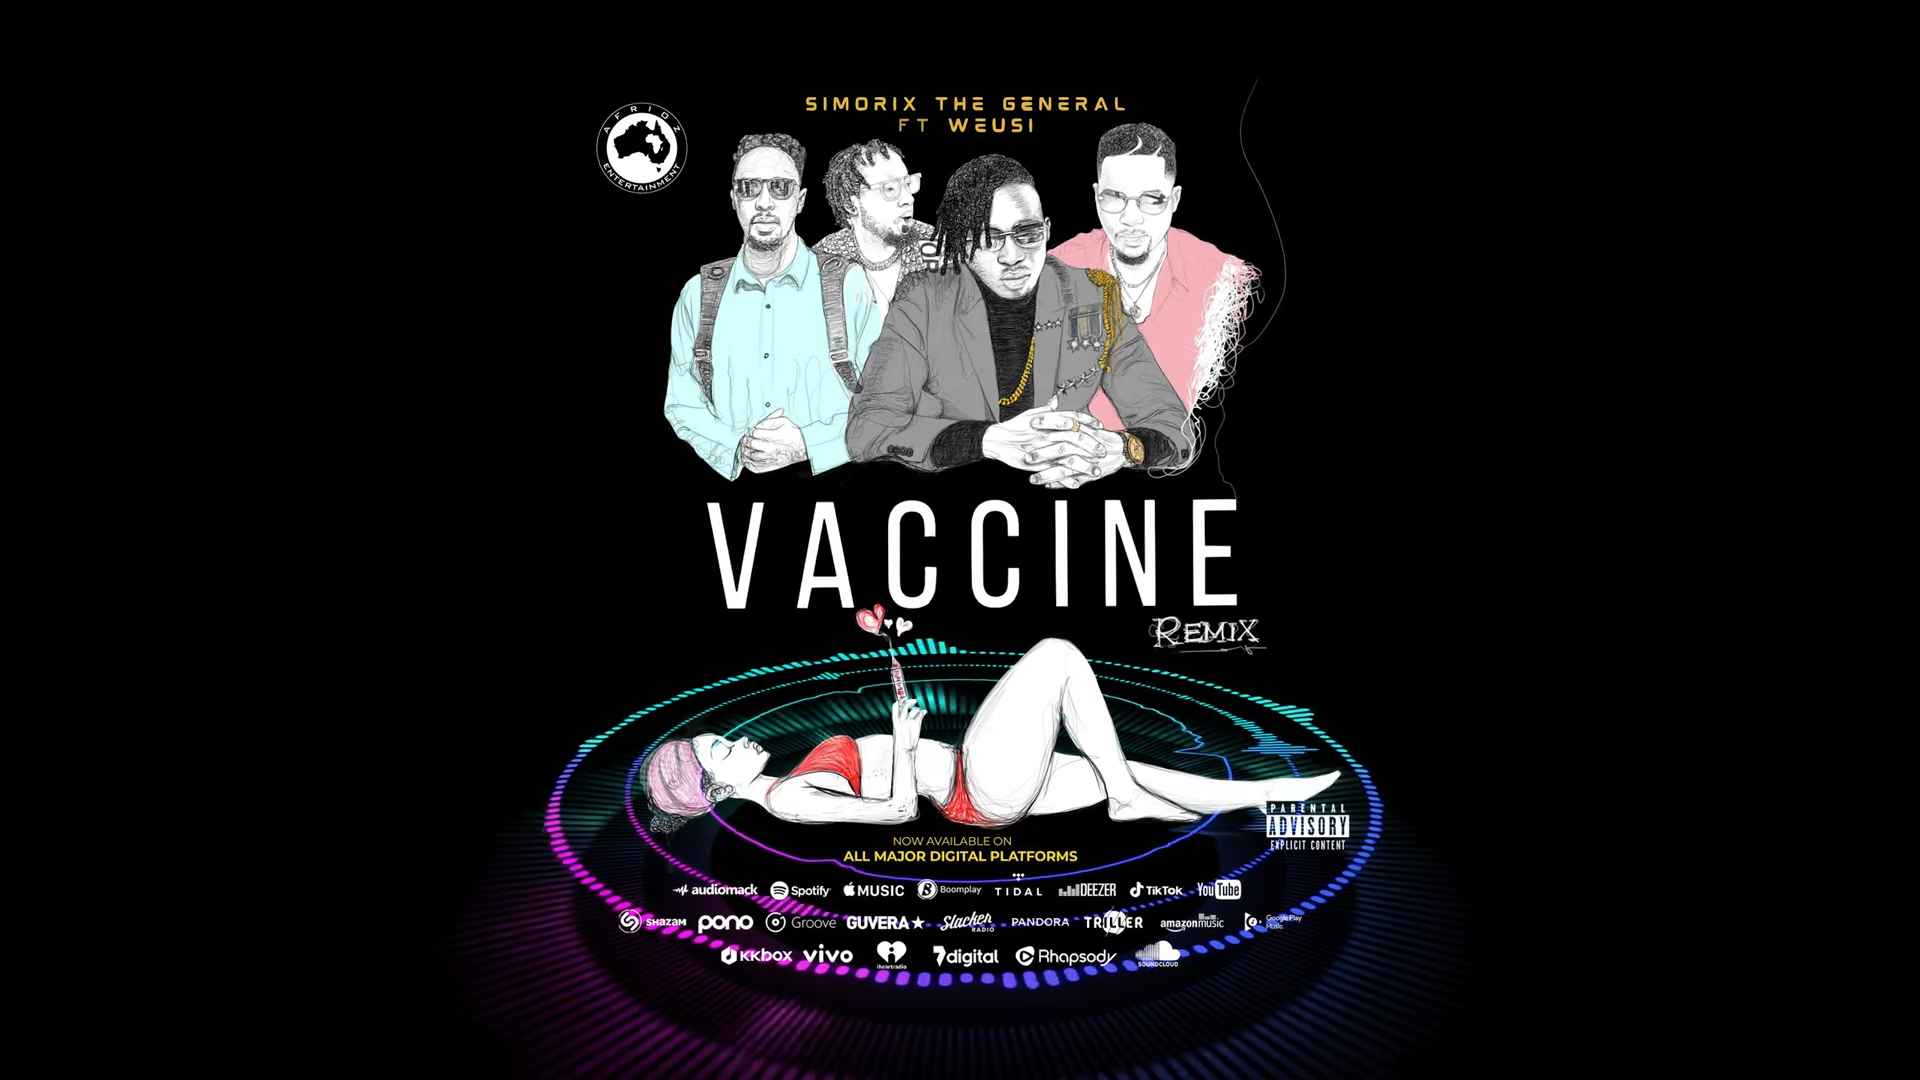 Simorix The General ft WEUSI - Vaccine (Remix) Mp3 Download